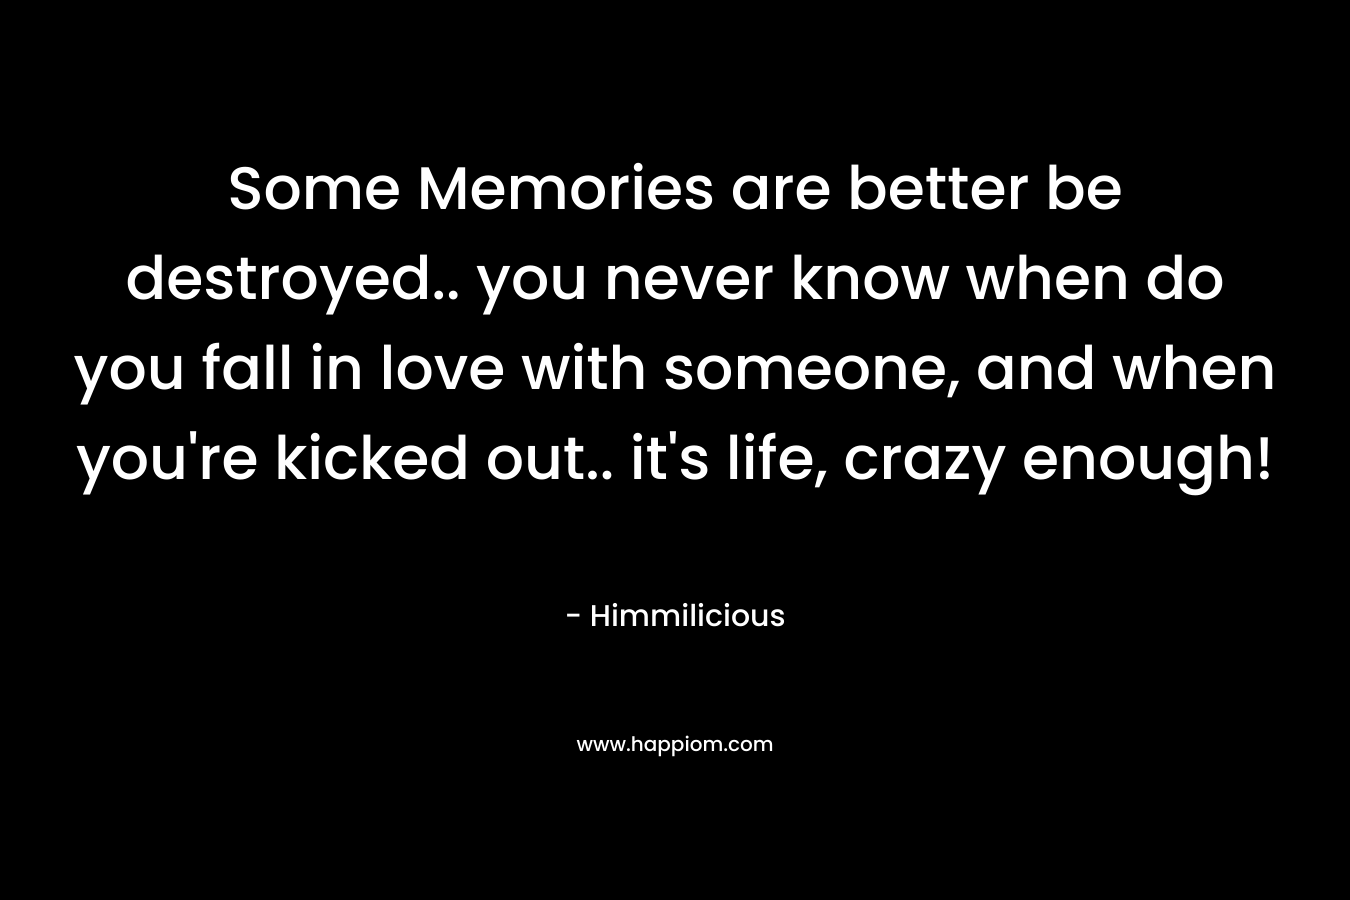 Some Memories are better be destroyed.. you never know when do you fall in love with someone, and when you're kicked out.. it's life, crazy enough!